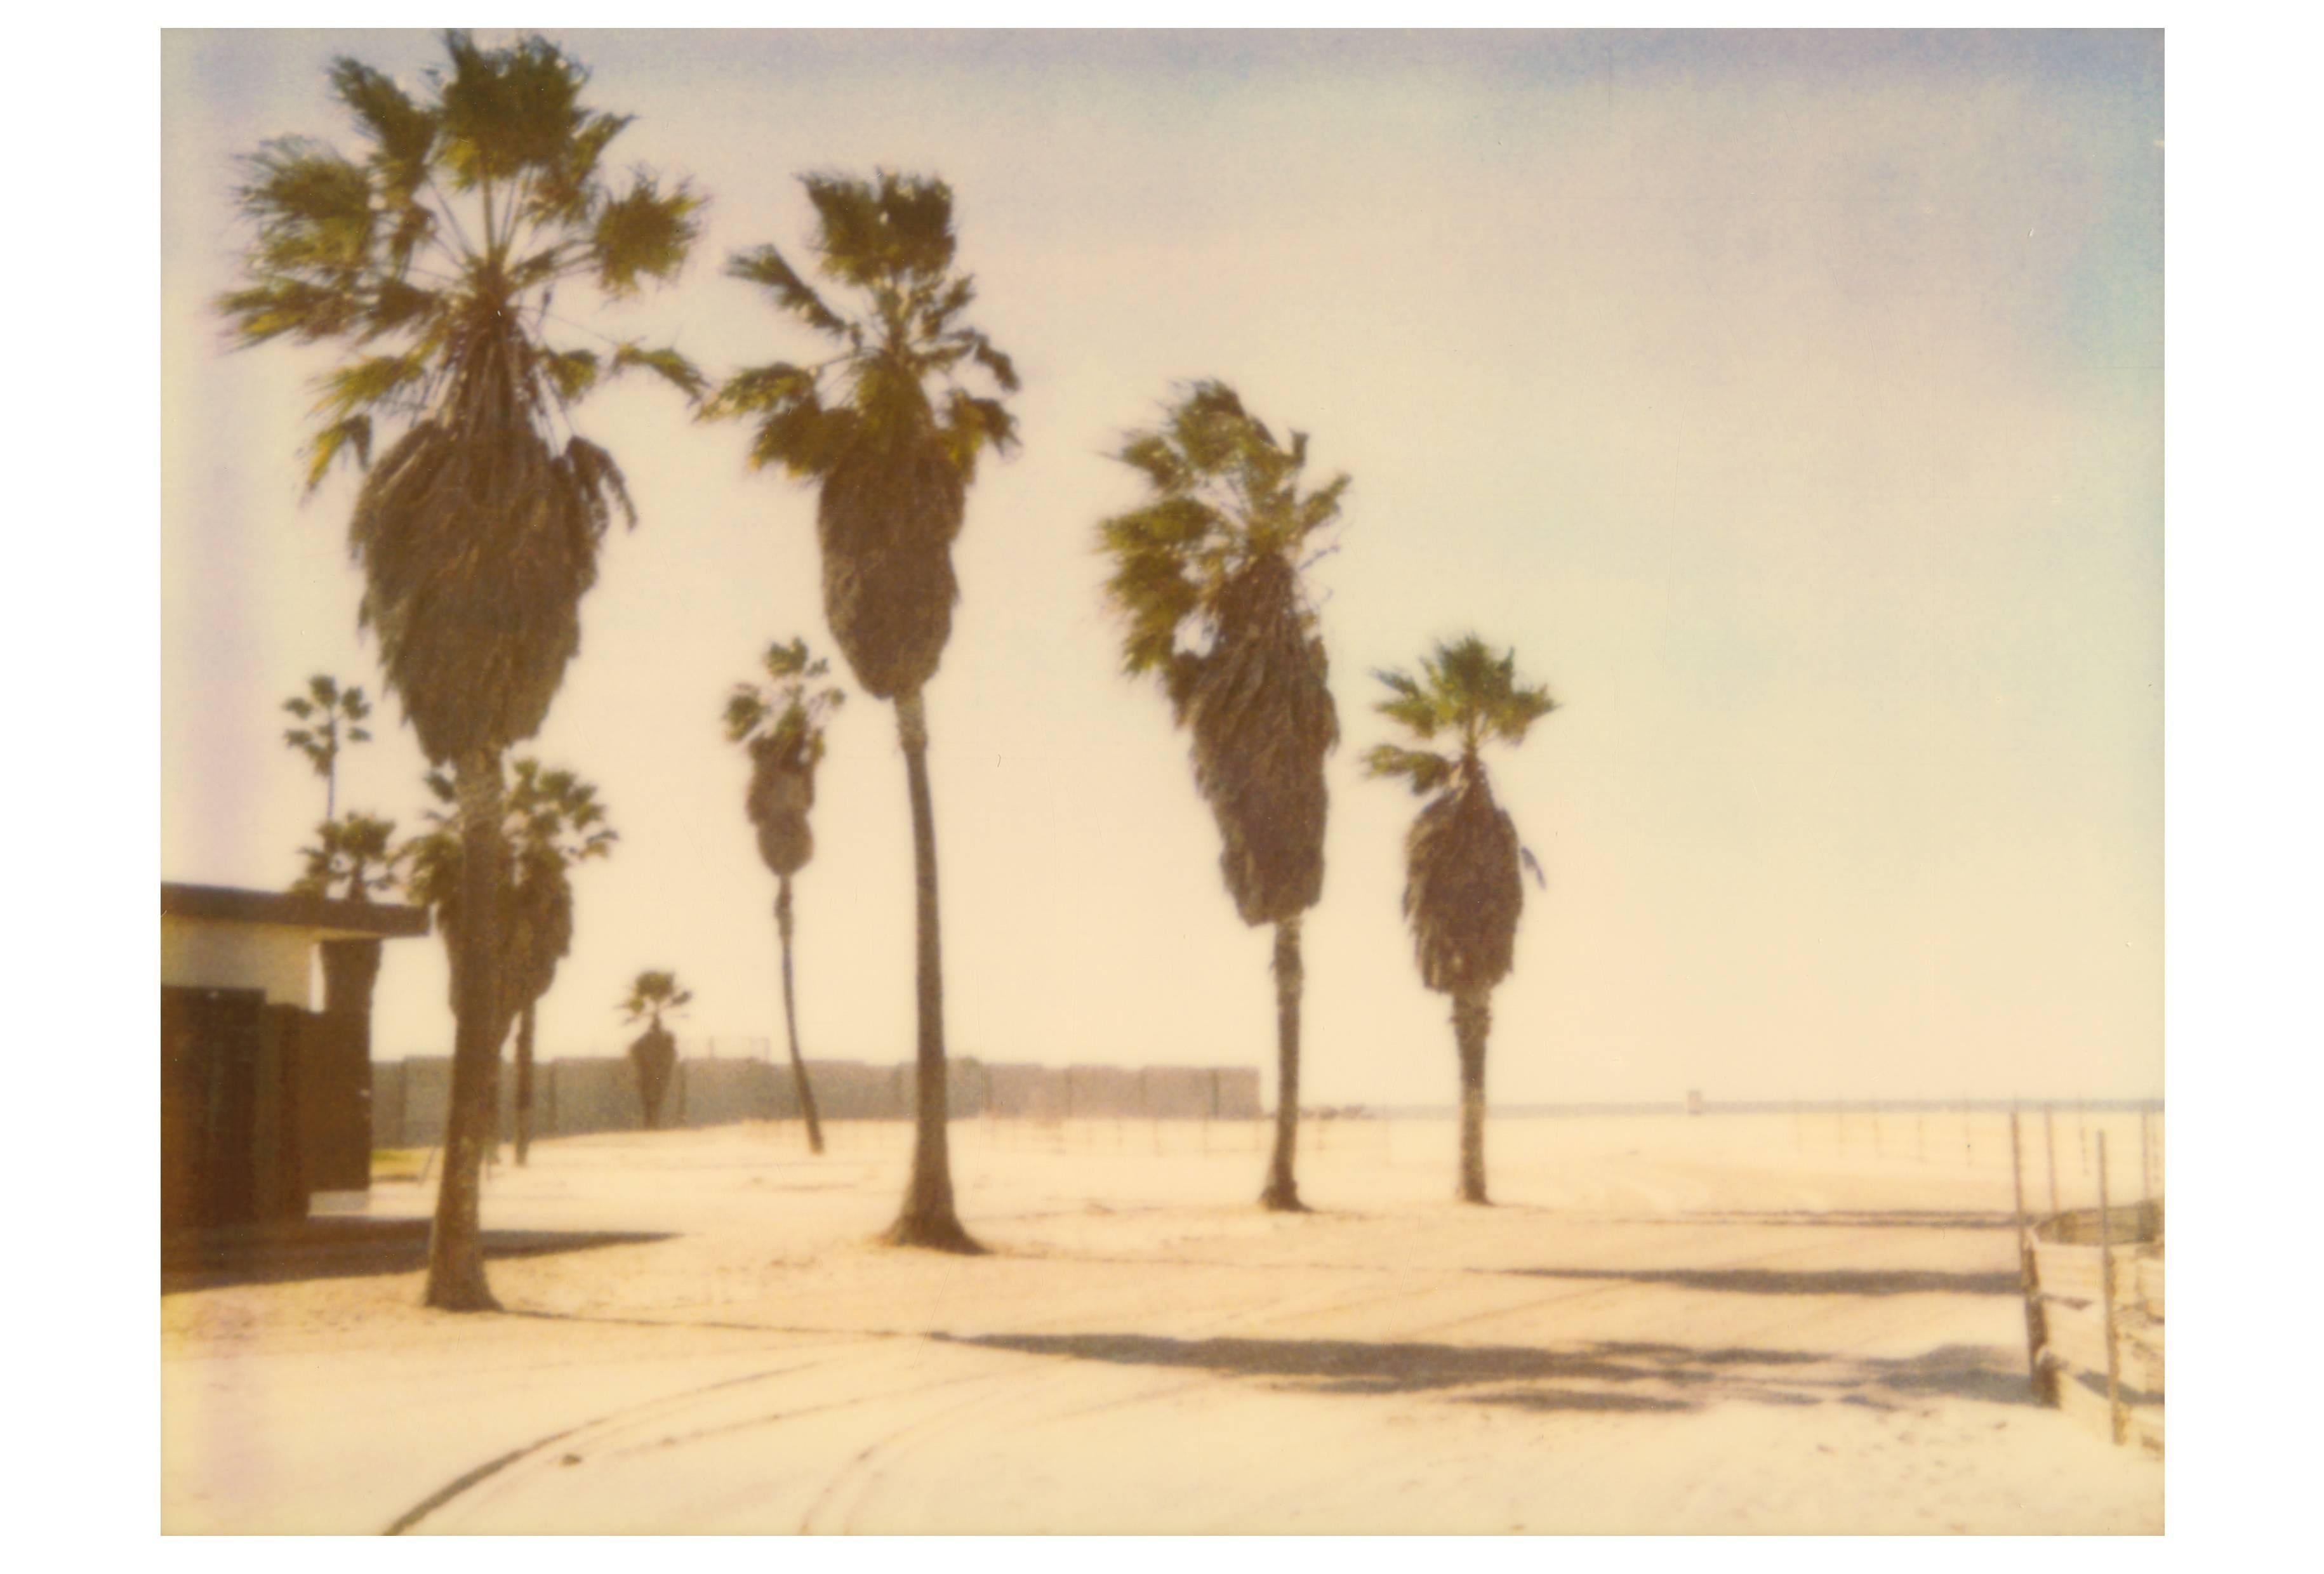 Stefanie Schneider Landscape Photograph - Palm Trees in Venice - analog C-Print, hand-printed by the artist